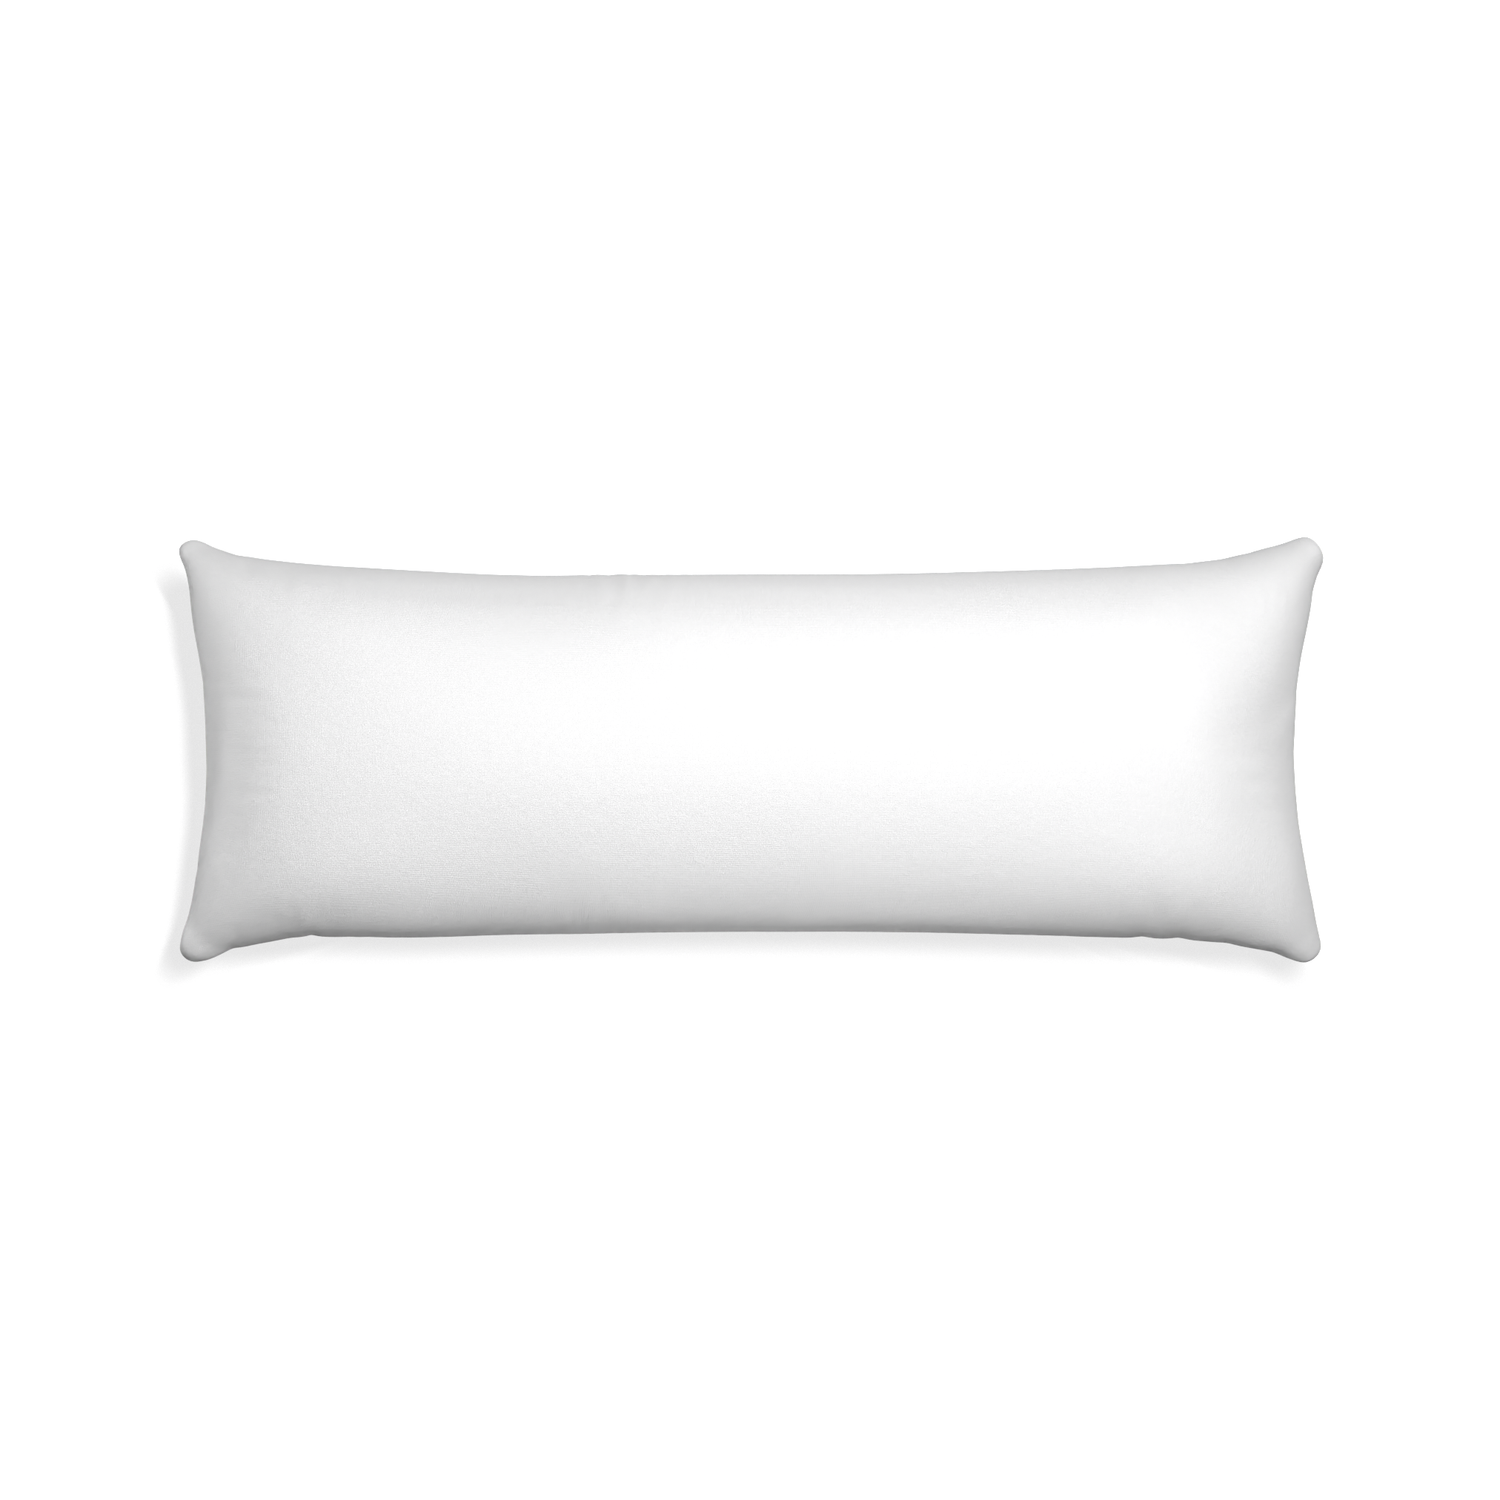 Xl-lumbar snow custom pillow with none on white background